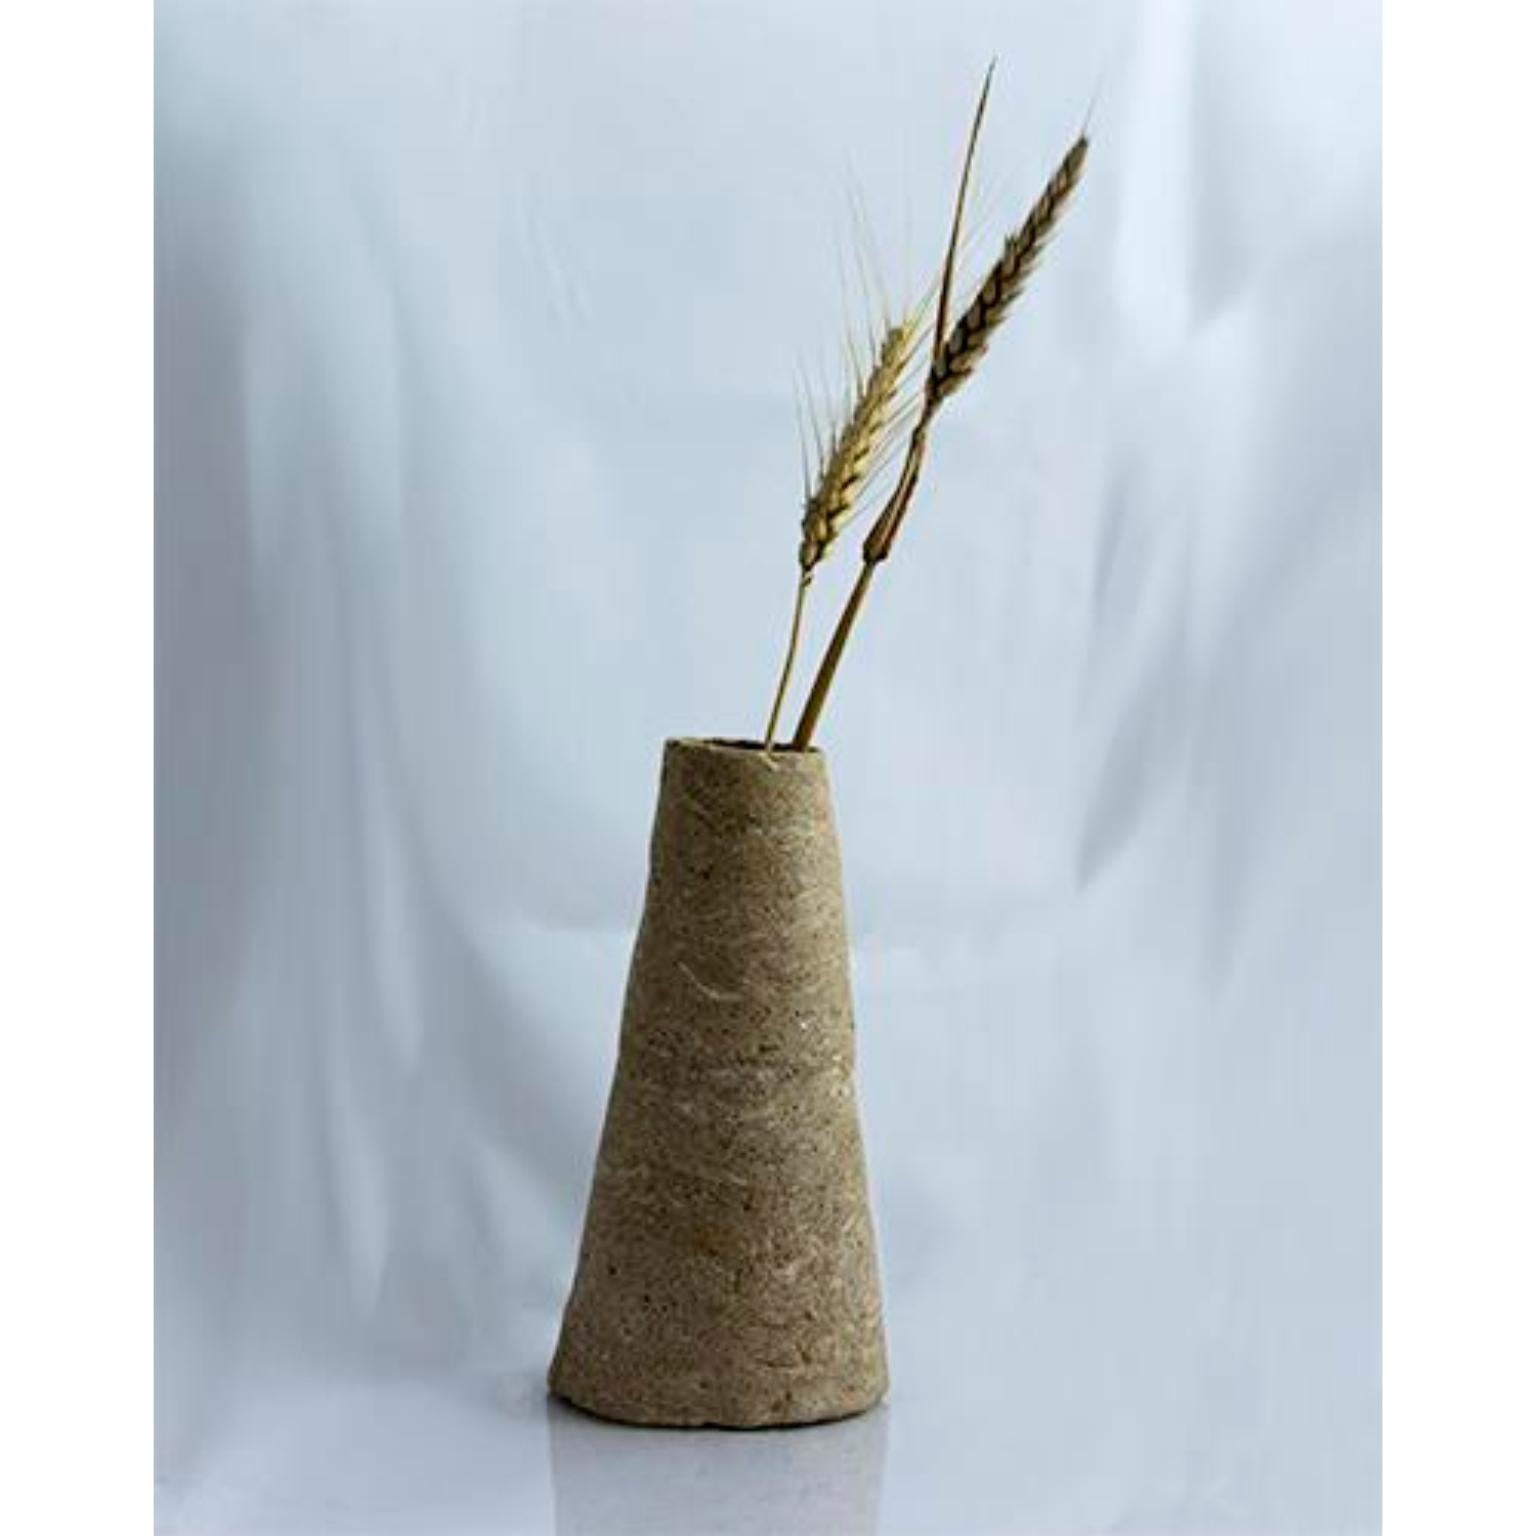 Set of 2 Alimenta vase by Riccardo Cenedella.
Dimensions: D 9 x H 20 cm.
Materials: Food waste based material.

I am Riccardo Cenedella I graduated in Product Design from Politecnico di Torino in 2016 and straight after my graduation I started